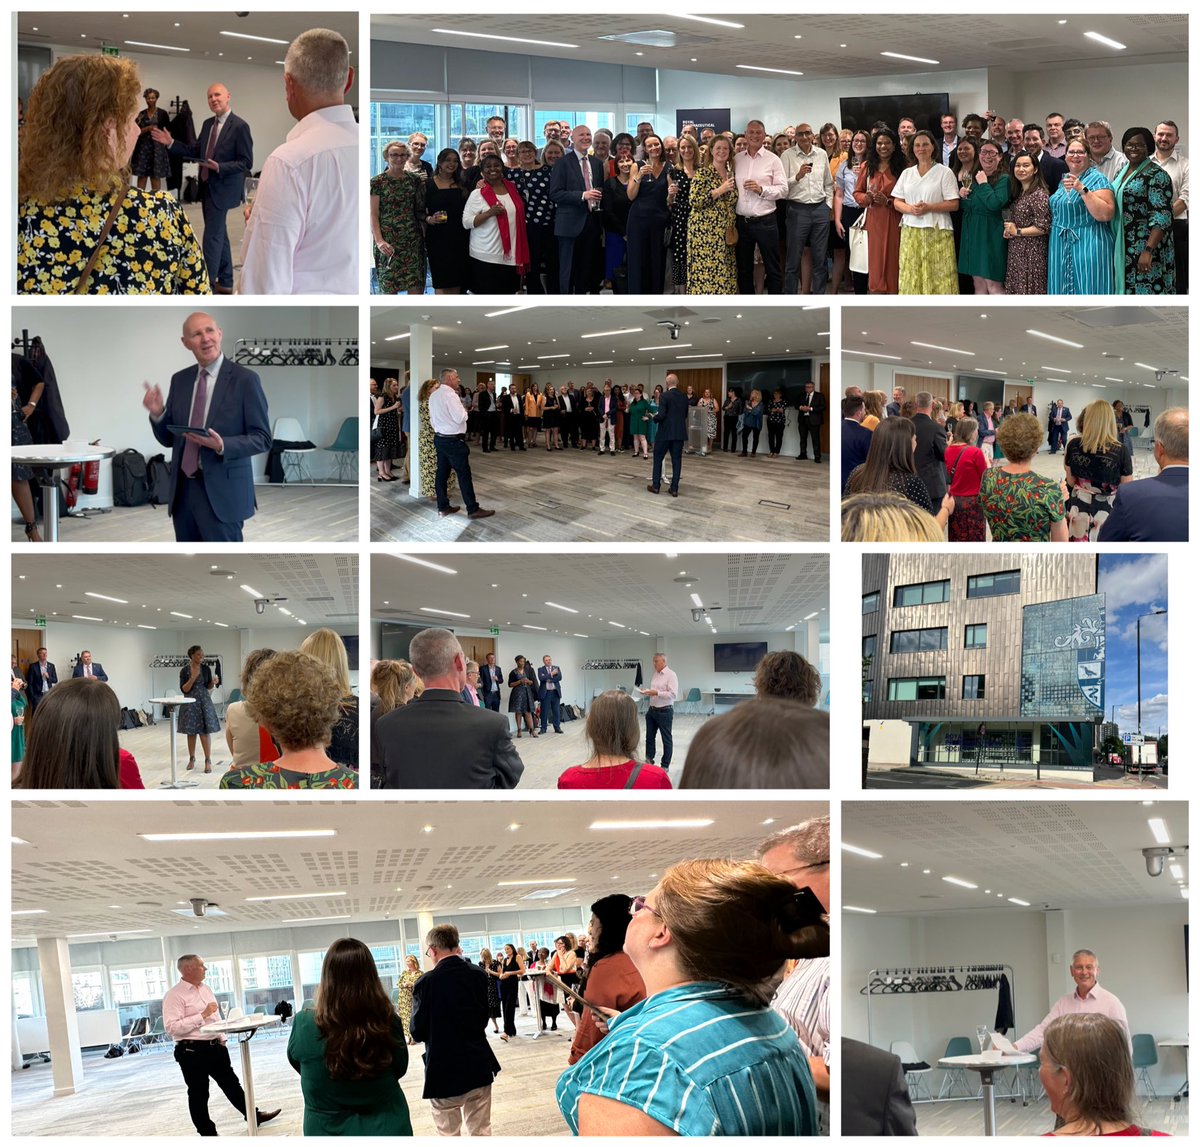 Yesterday colleagues gathered @rpharms to thank & celebrate the amazing leadership of @BruceWarner championing patient safety over several decades across Community Pharmacy, GP practice, academia, NPSA & as Deputy CPhO since 2014. The Mrs Warner test embedded. #WearePharmacy